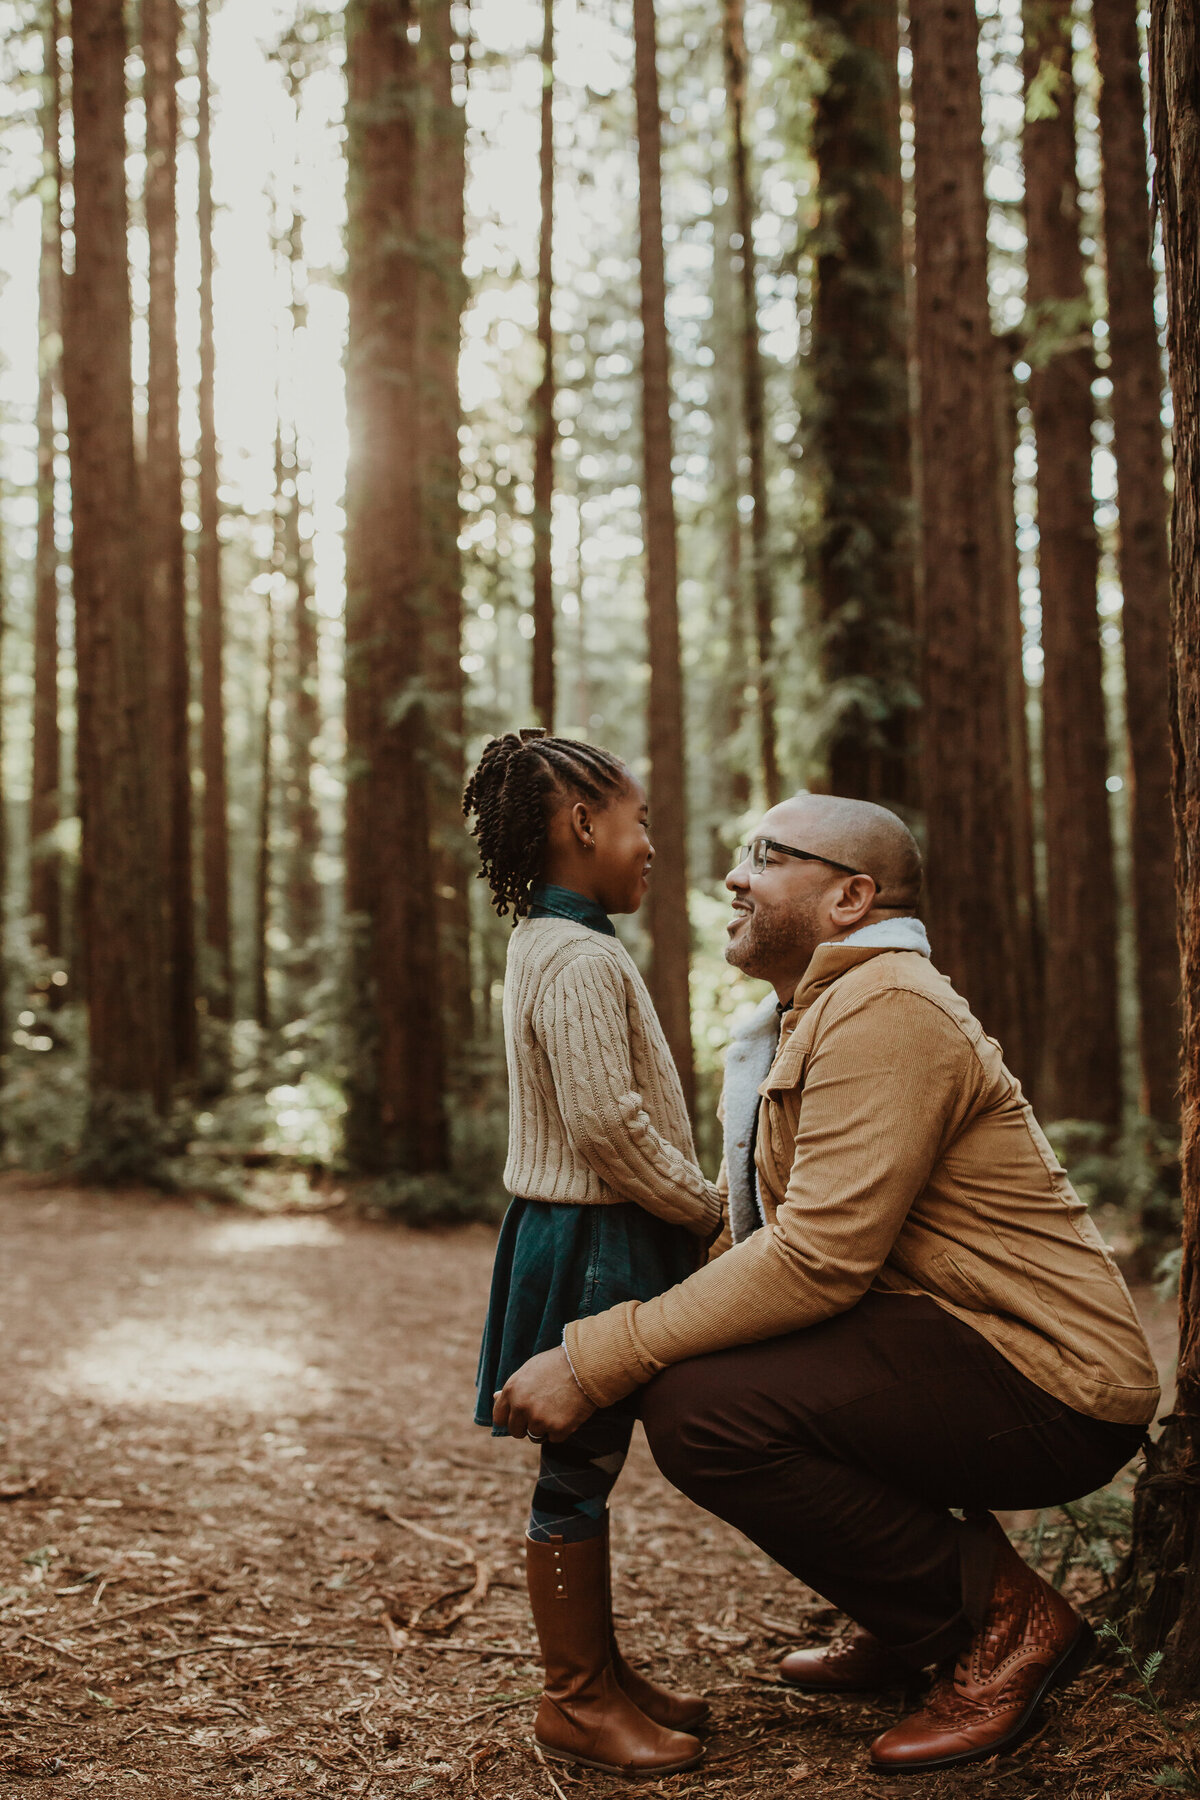 Lifestyle image of father crouched down looking at daughter in Oakland Joaquin Miller Redwood forest.